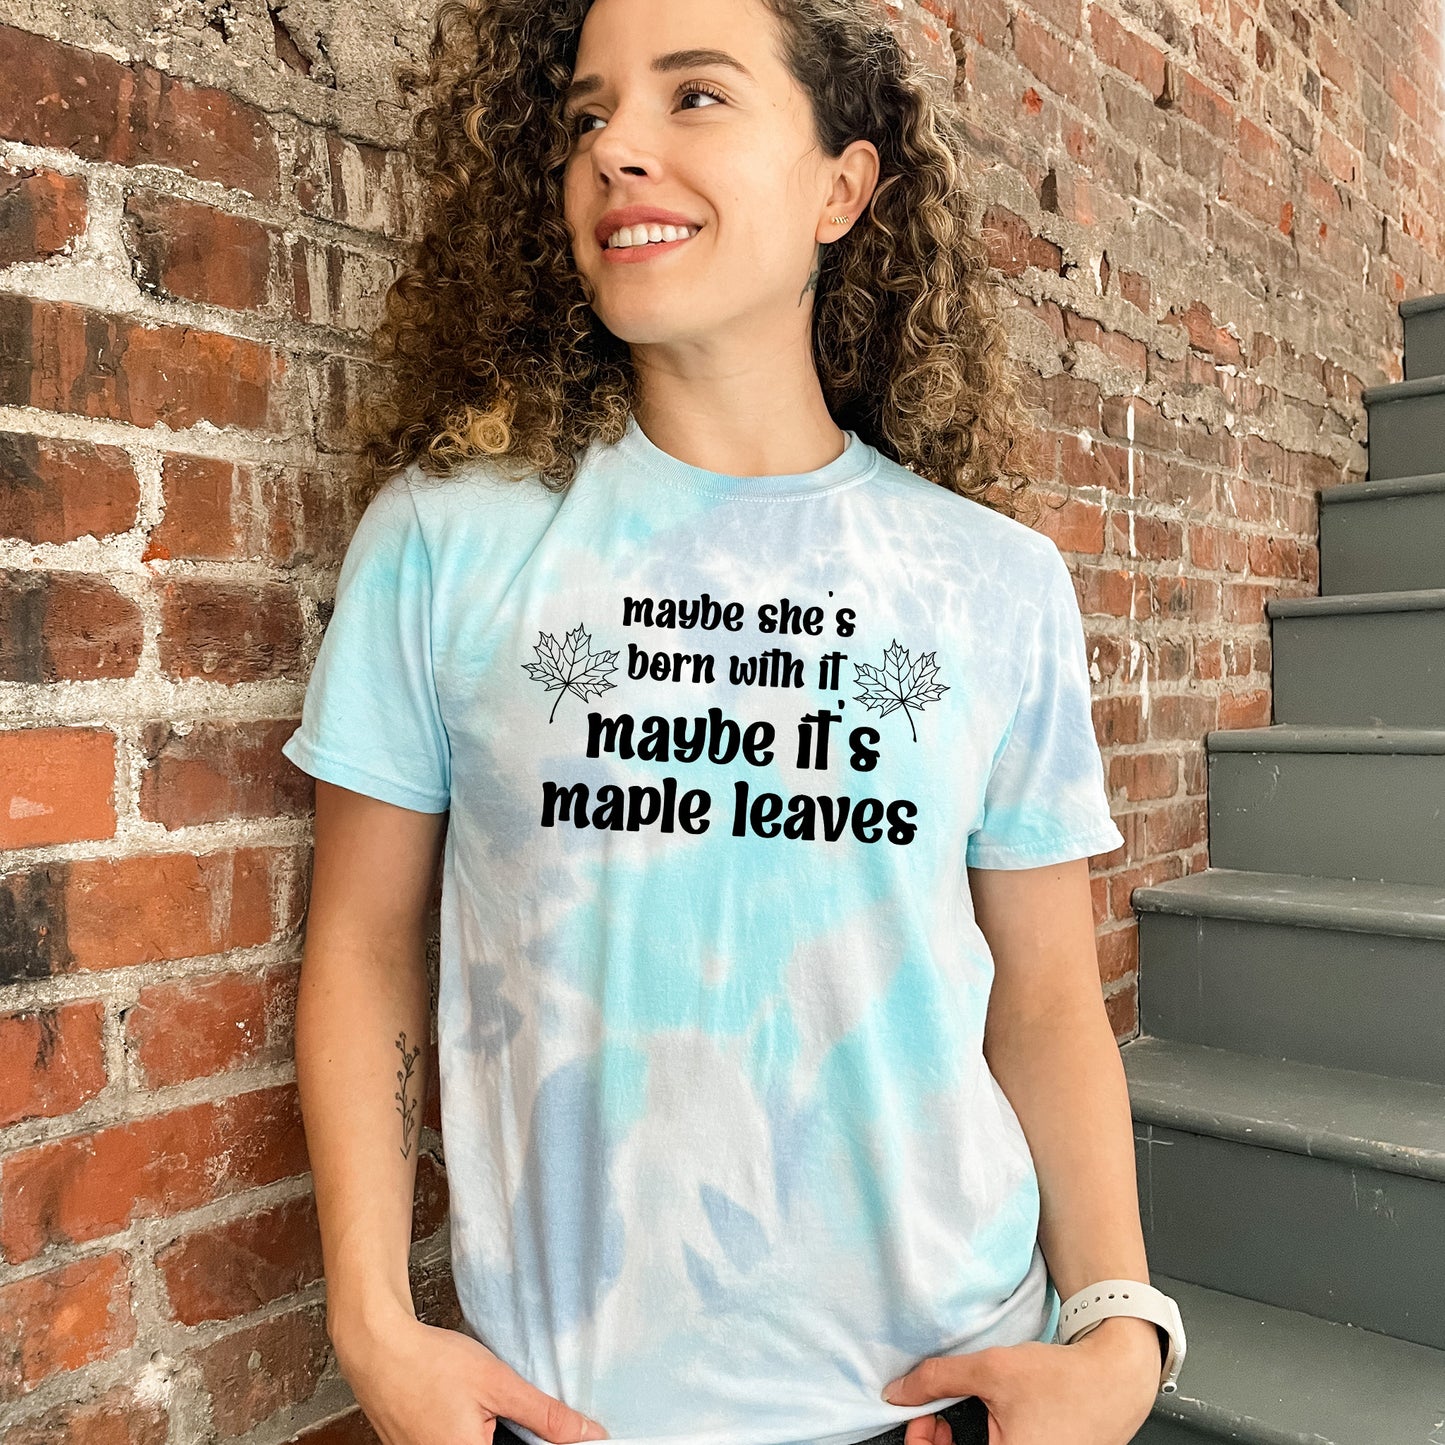 Maybe She's Born With It, Maybe It's Maple Leaves - Mens/Unisex Tie Dye Tee - Blue